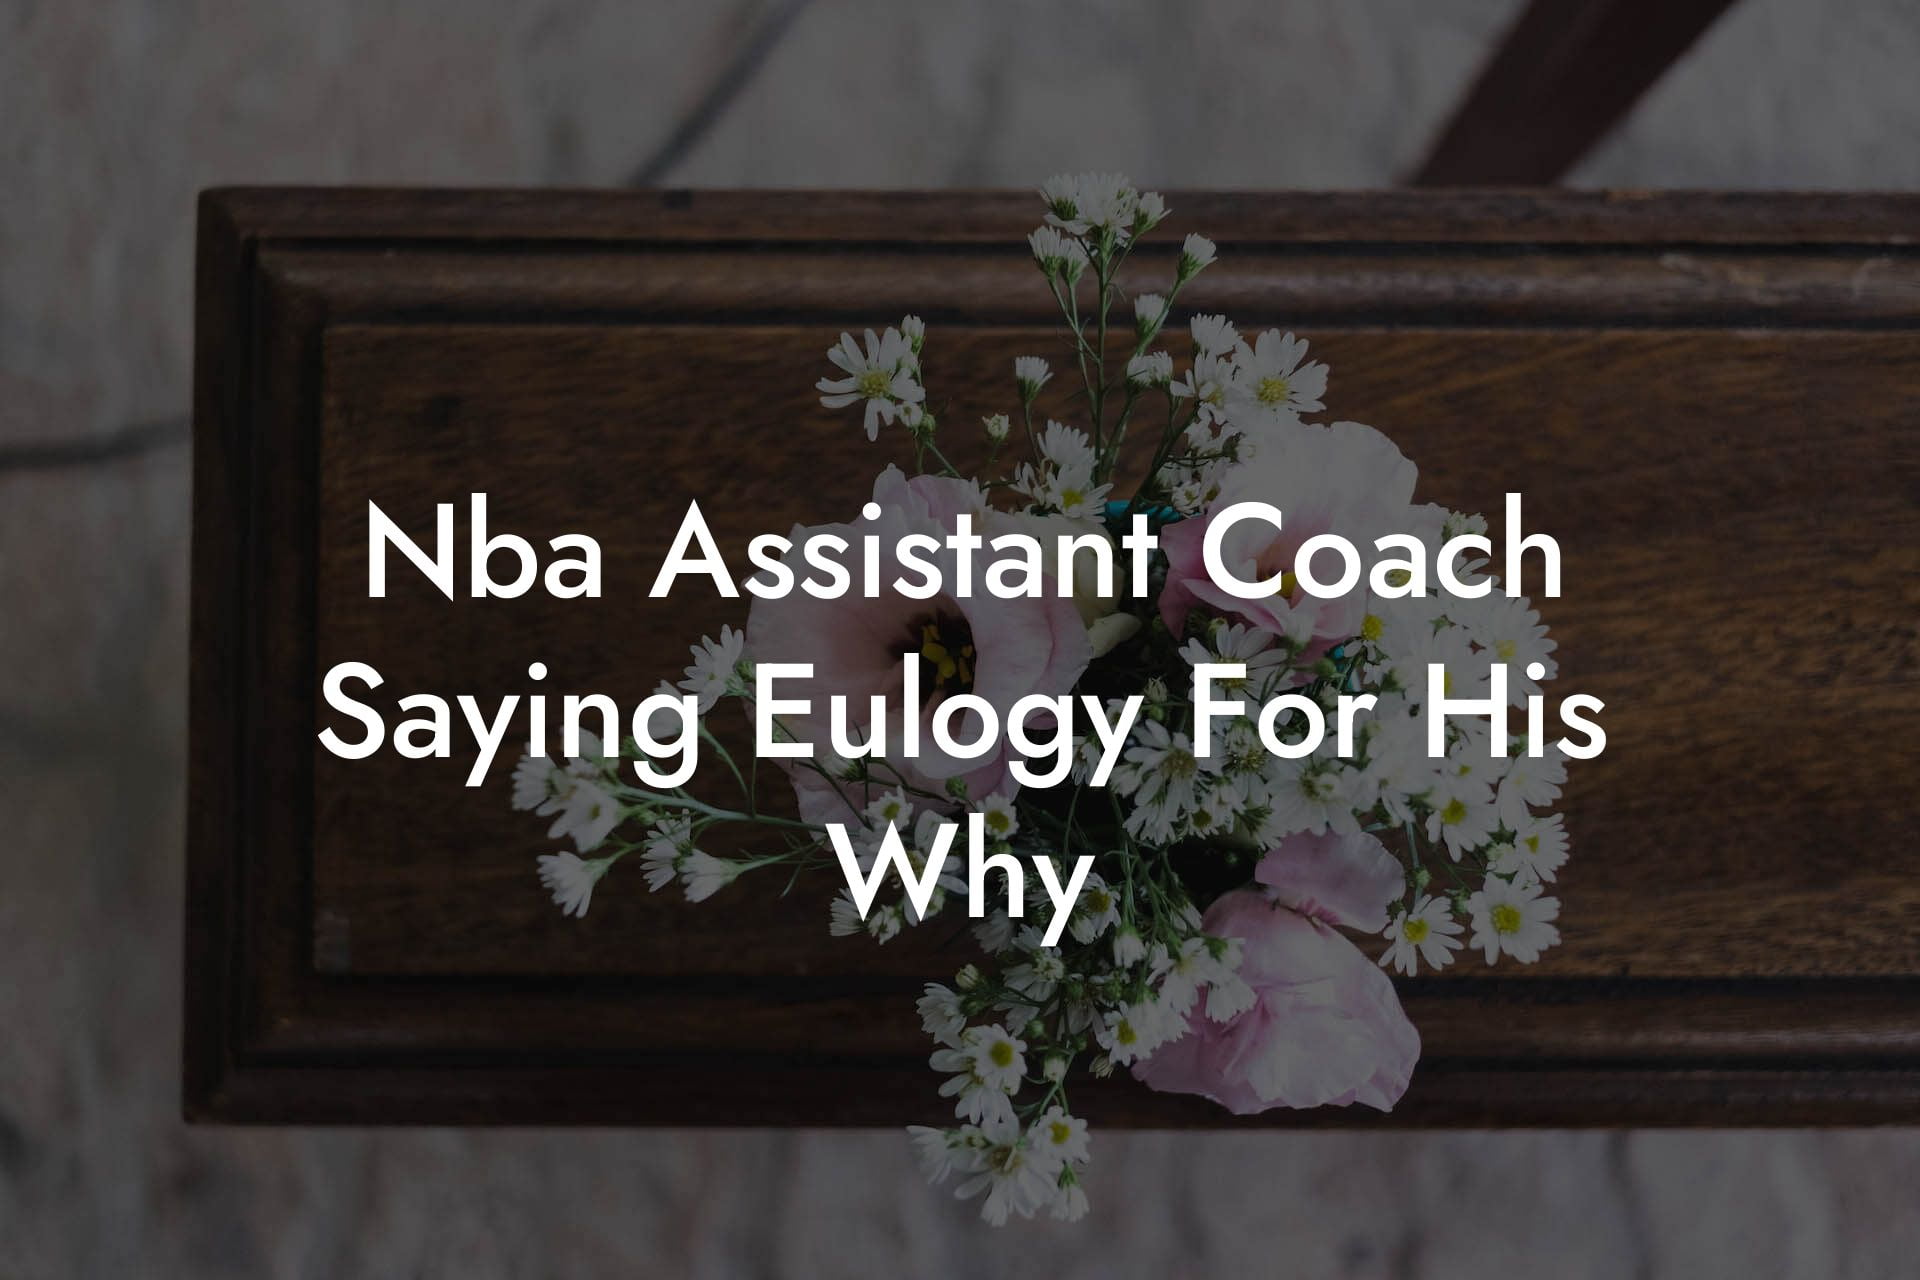 Nba Assistant Coach Saying Eulogy For His Why